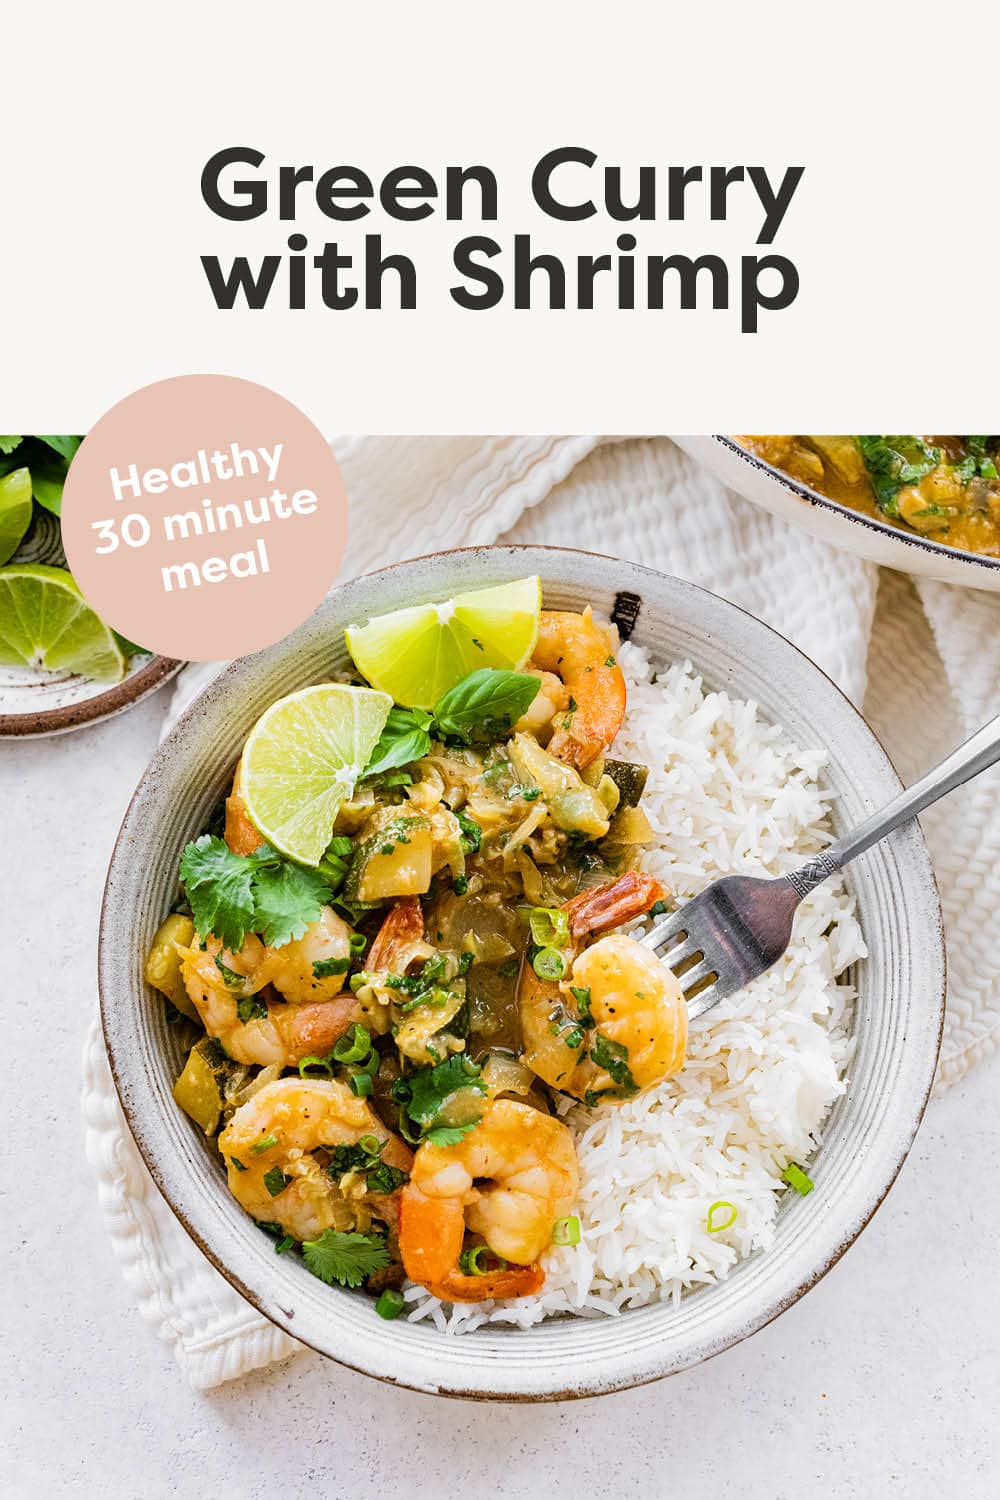 Bowl of green curry shrimp and rice.